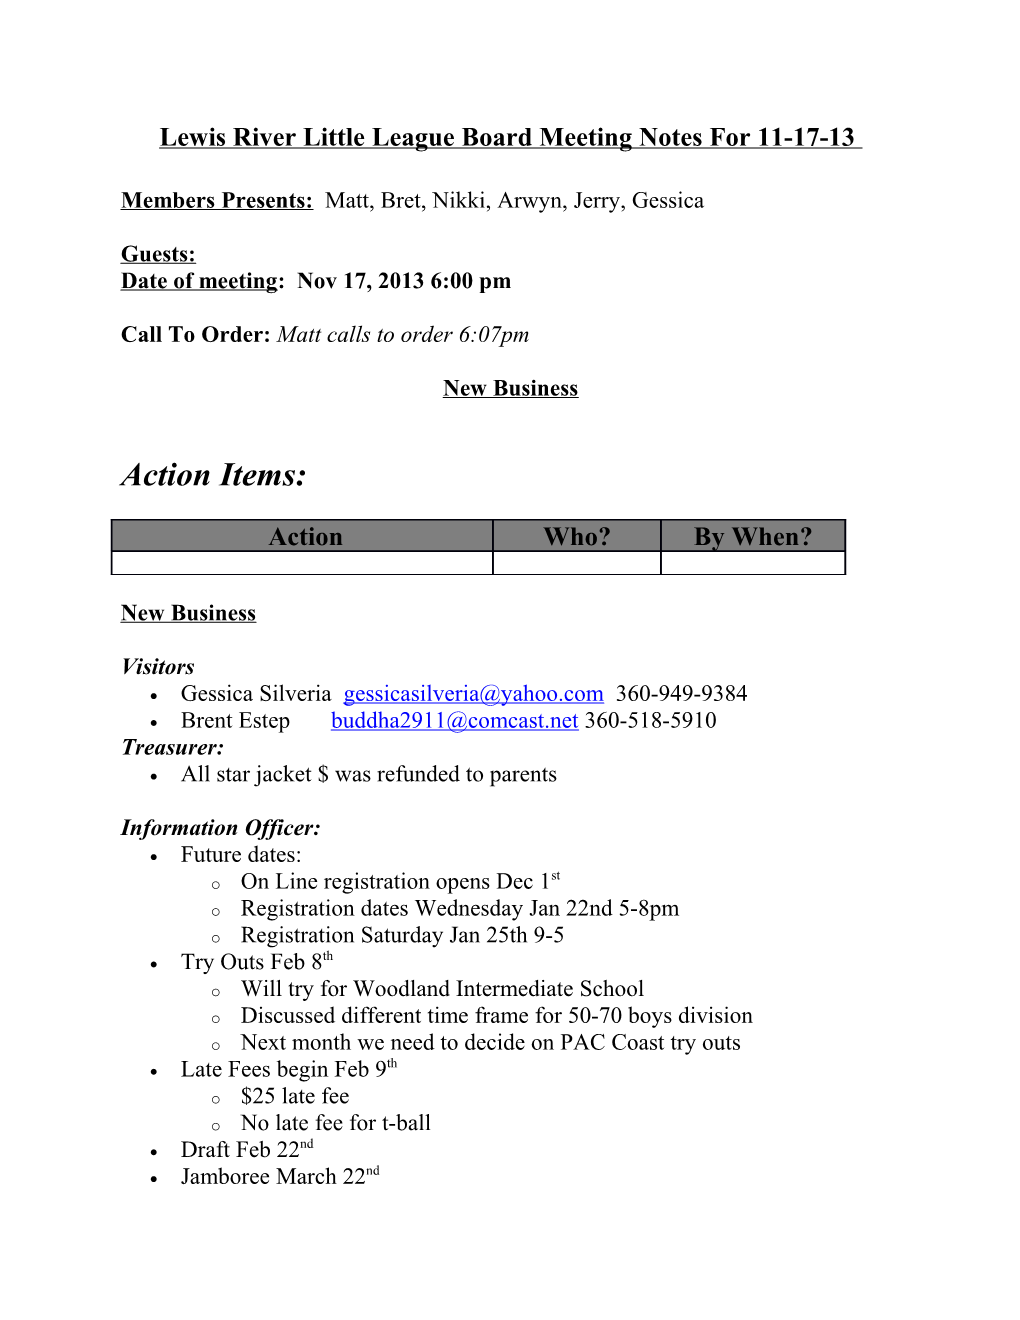 Lewis River Little League Board Meeting Notes for 11-17-13